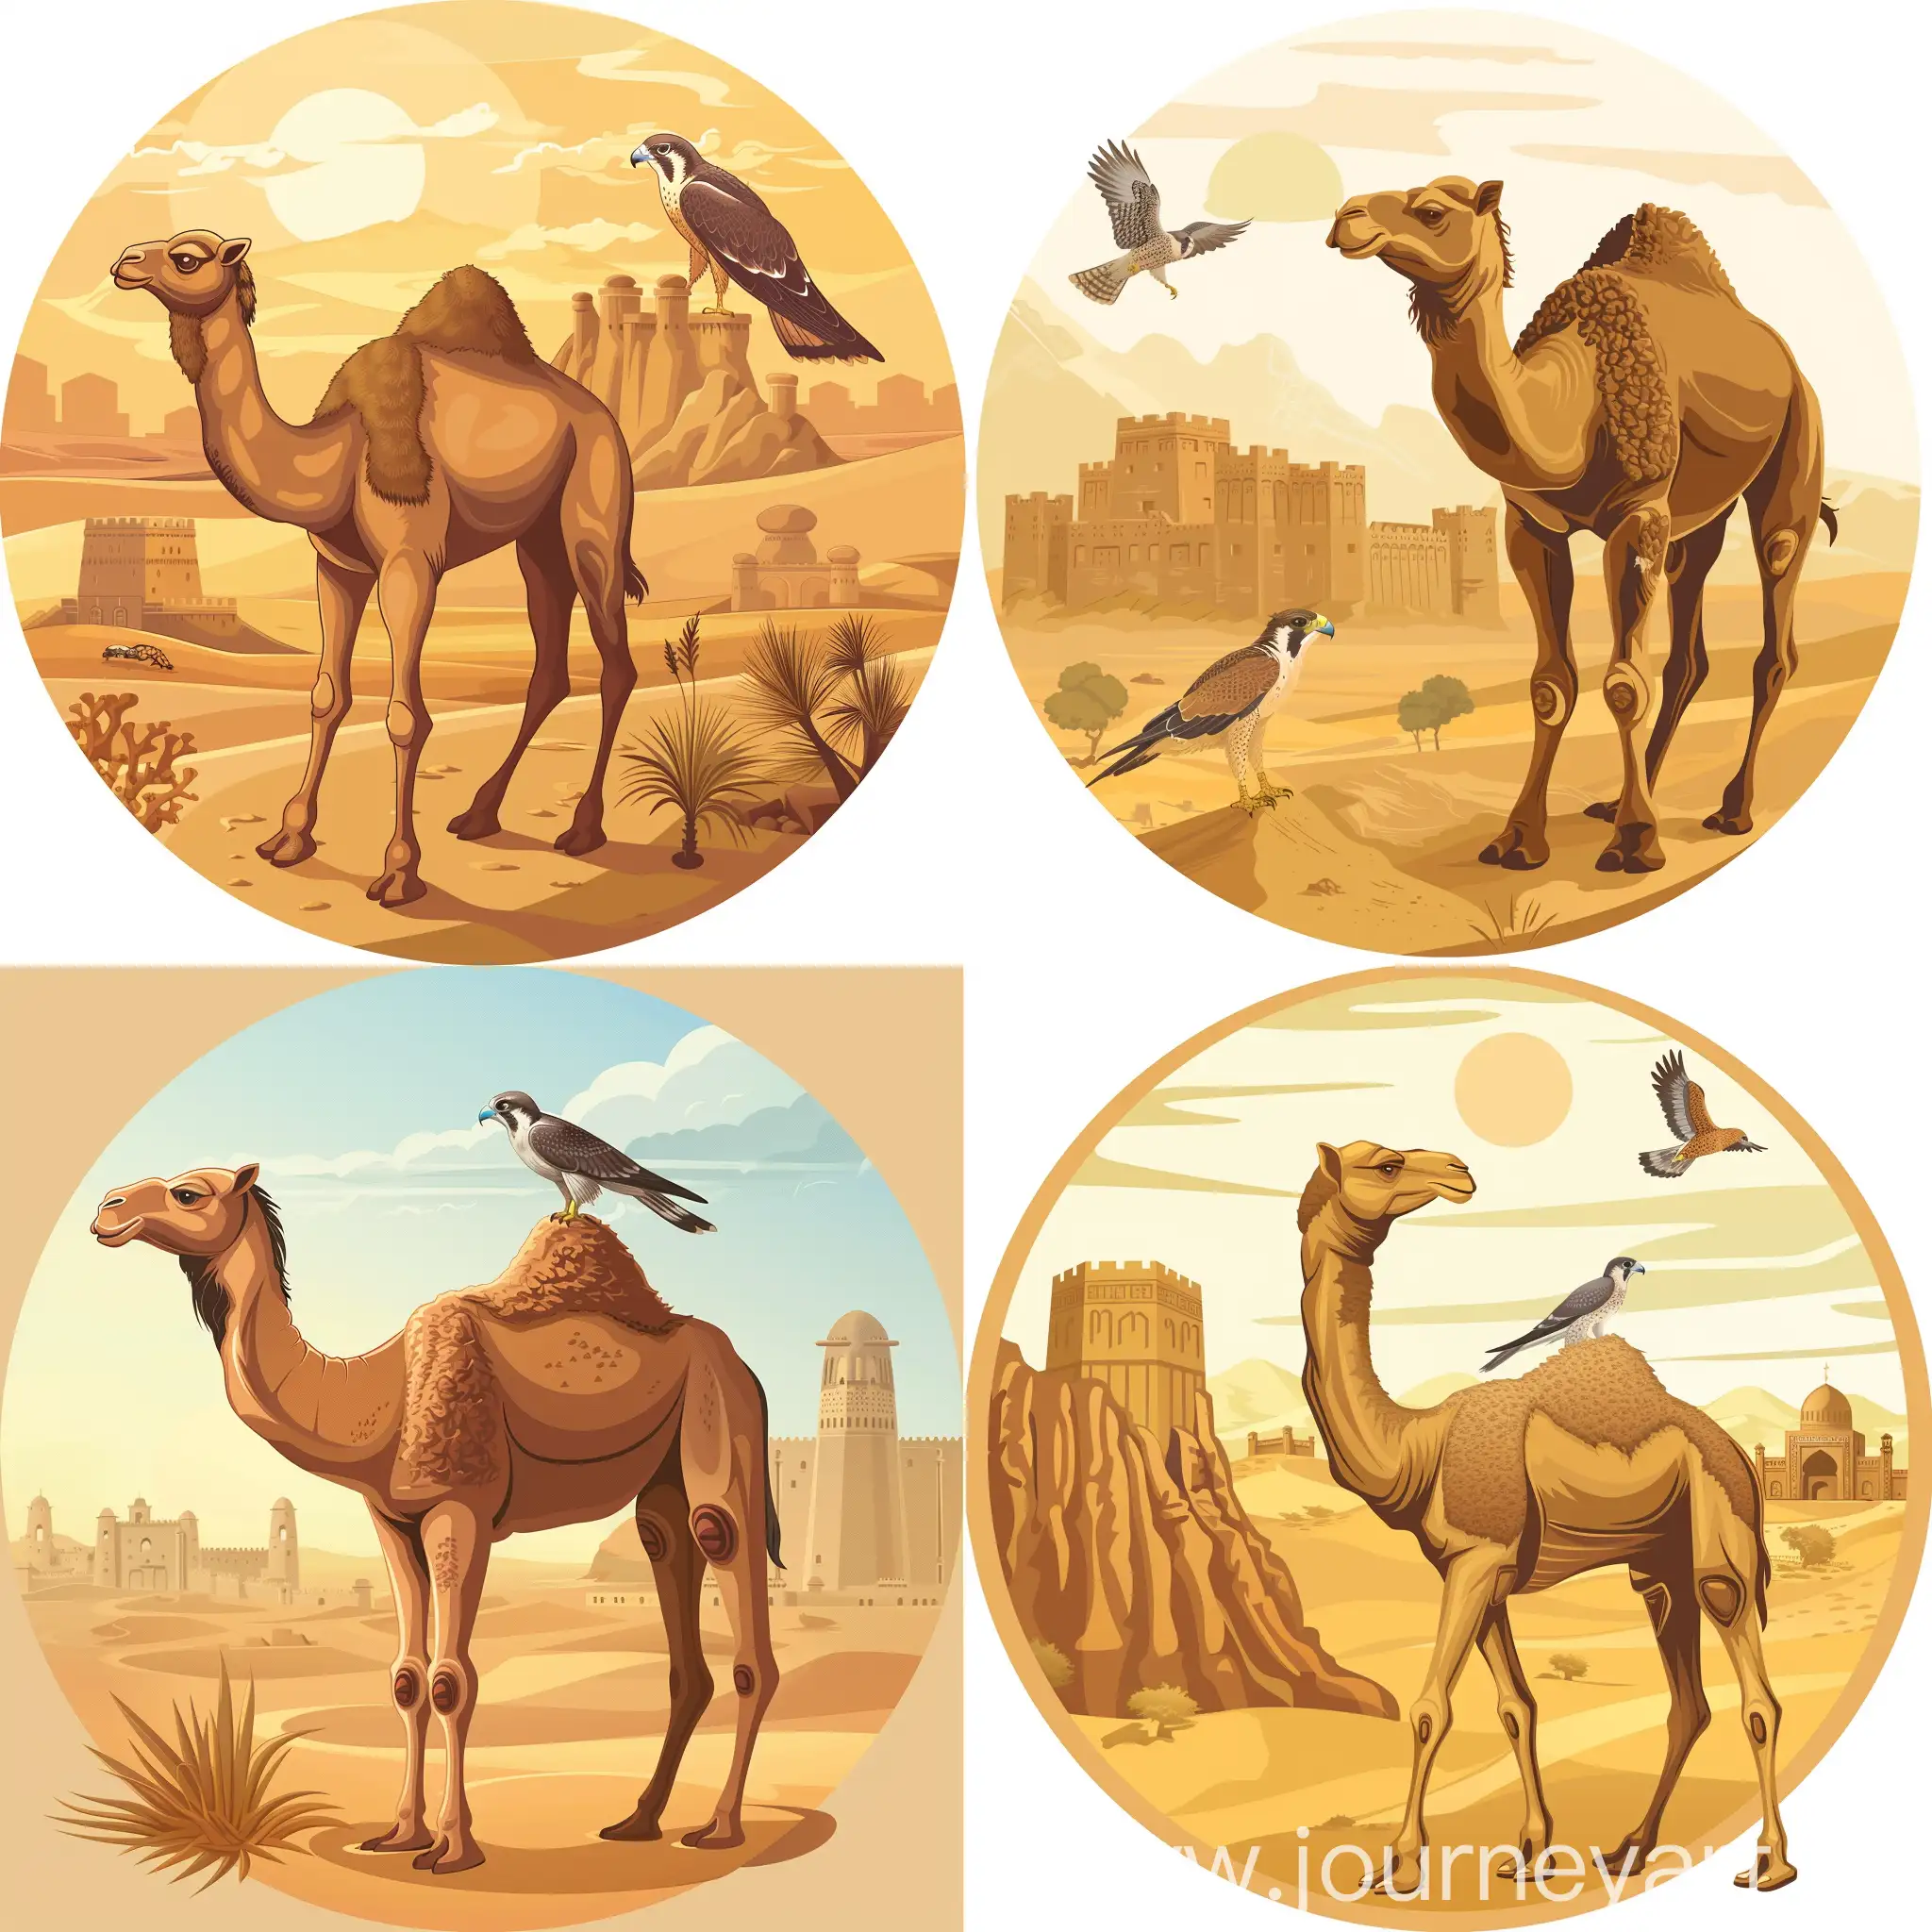 Desert-Camel-and-Falcon-with-Circular-Forts-in-Background